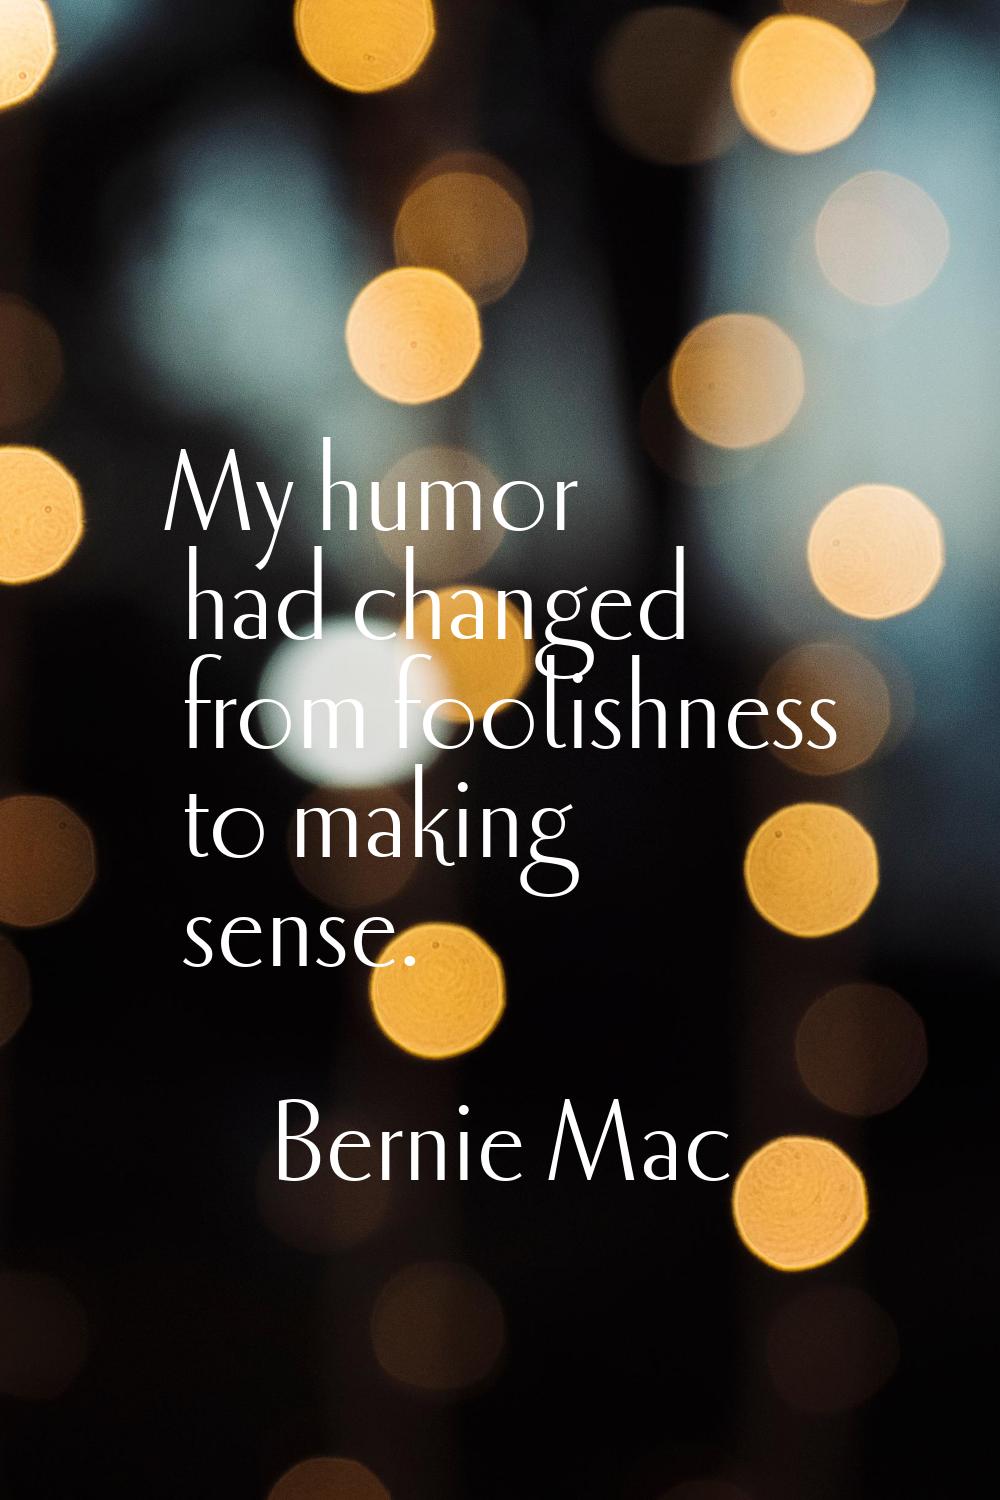 My humor had changed from foolishness to making sense.